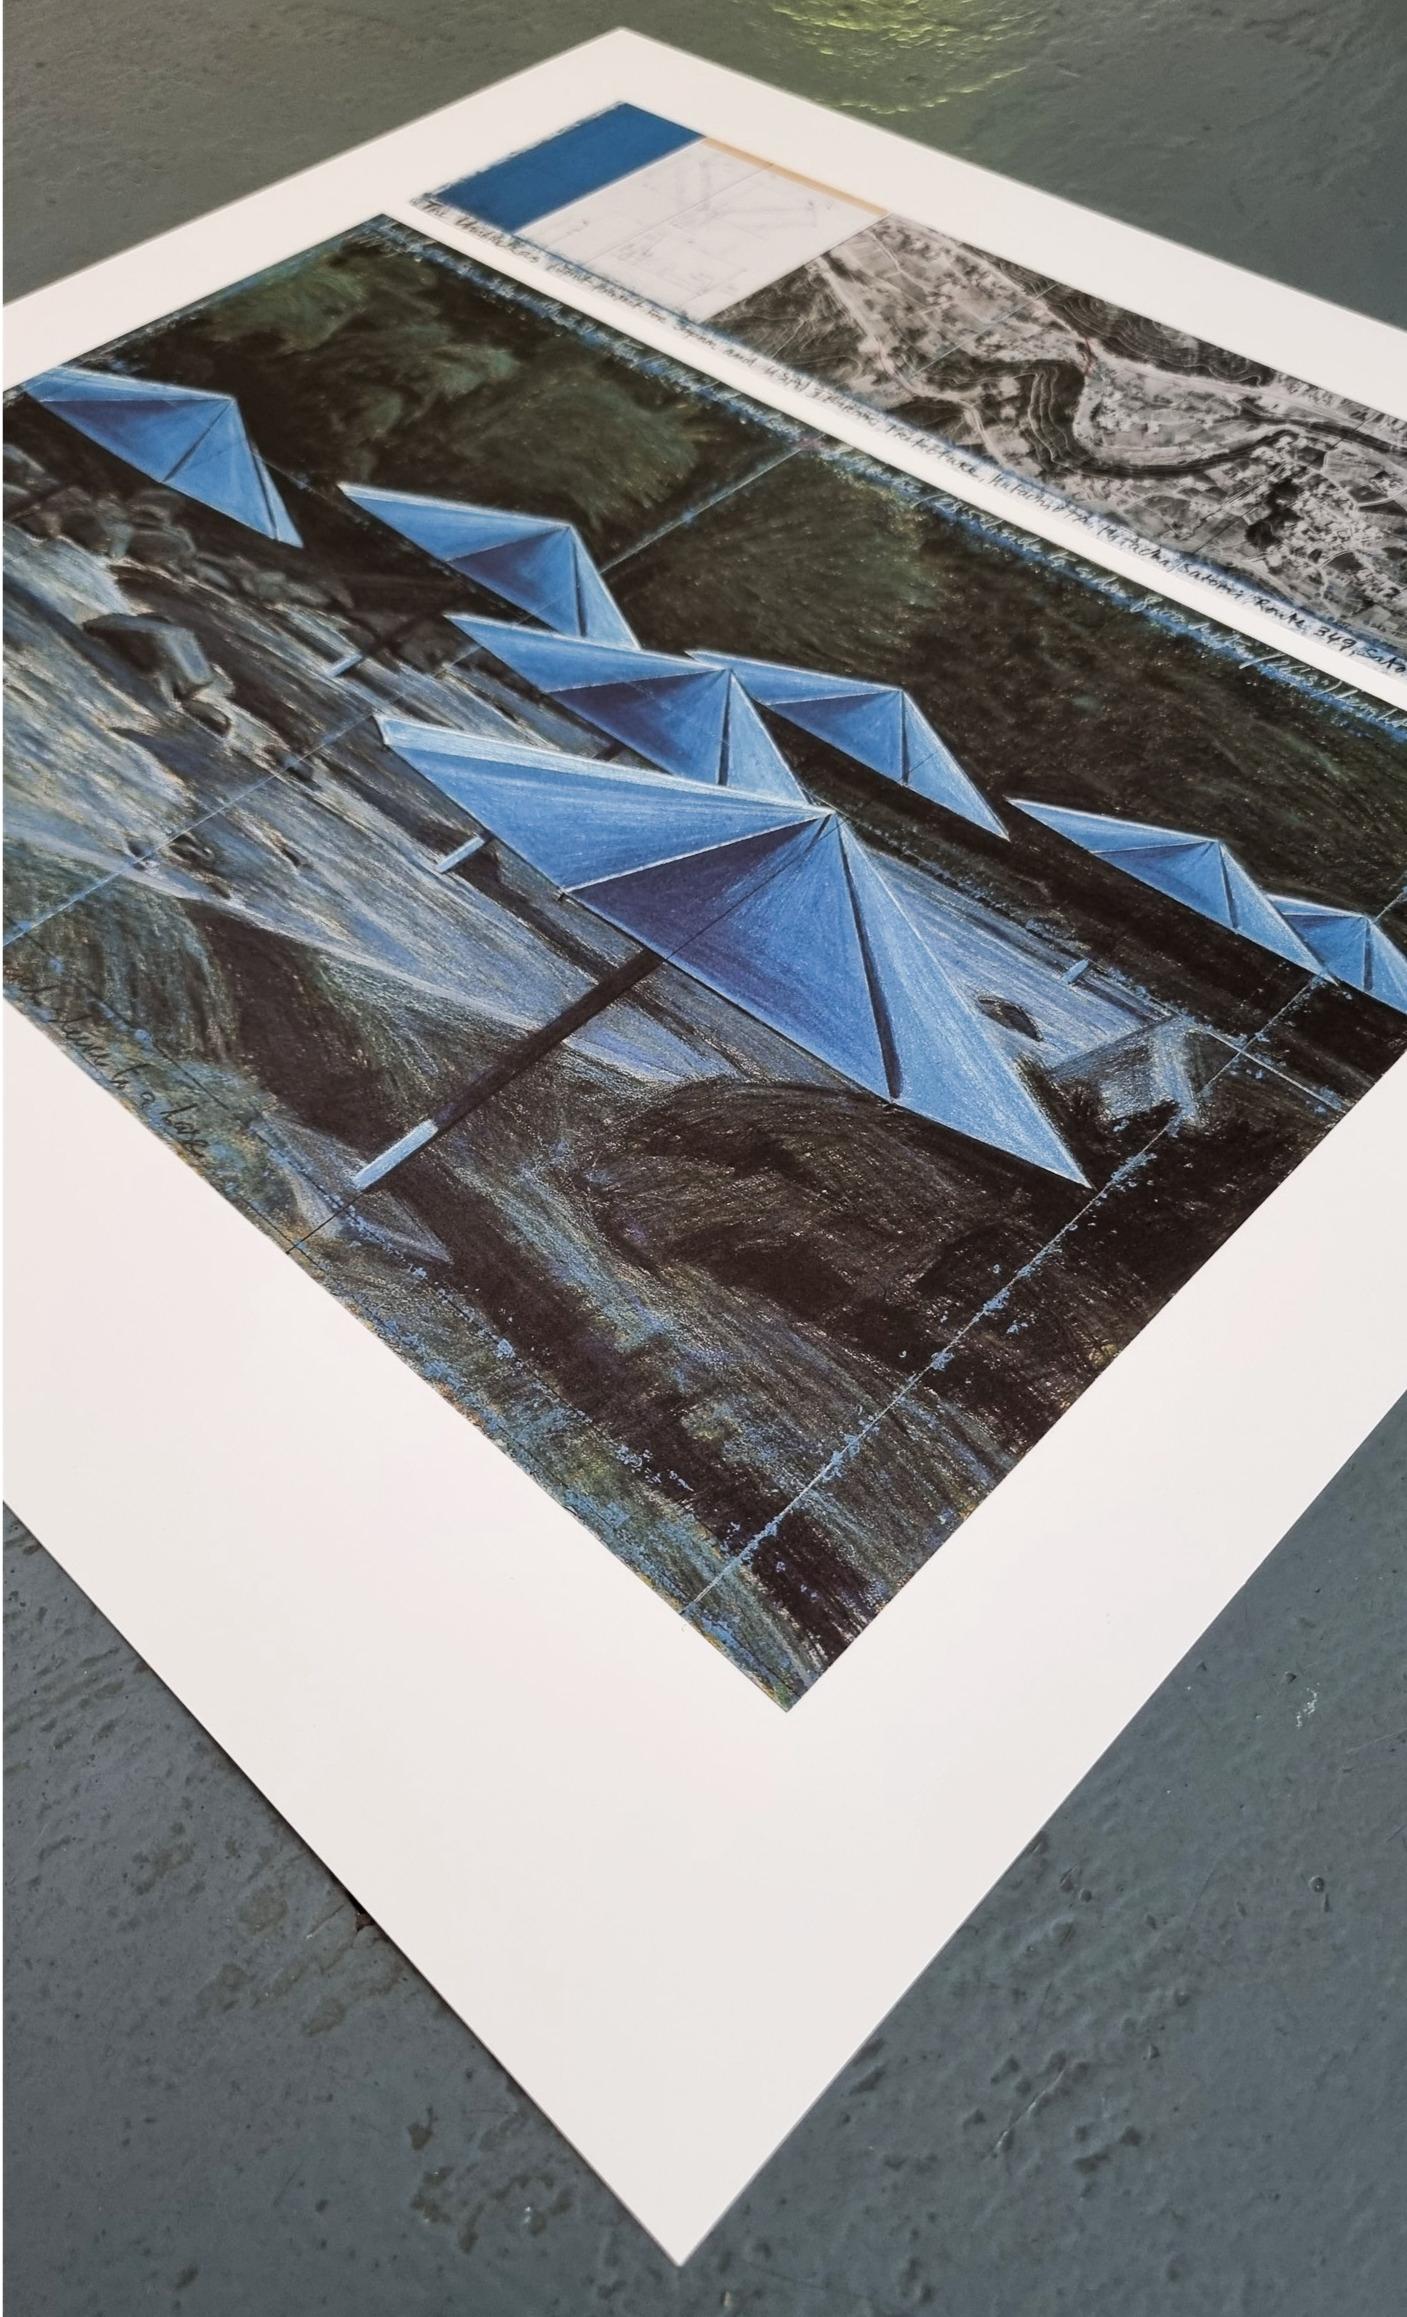 The Umbrellas (Blue) (FRAMED - BLACK OR WHITE - YOU CHOOSE - FREE US SHIPPING) - Print by Christo and Jeanne-Claude